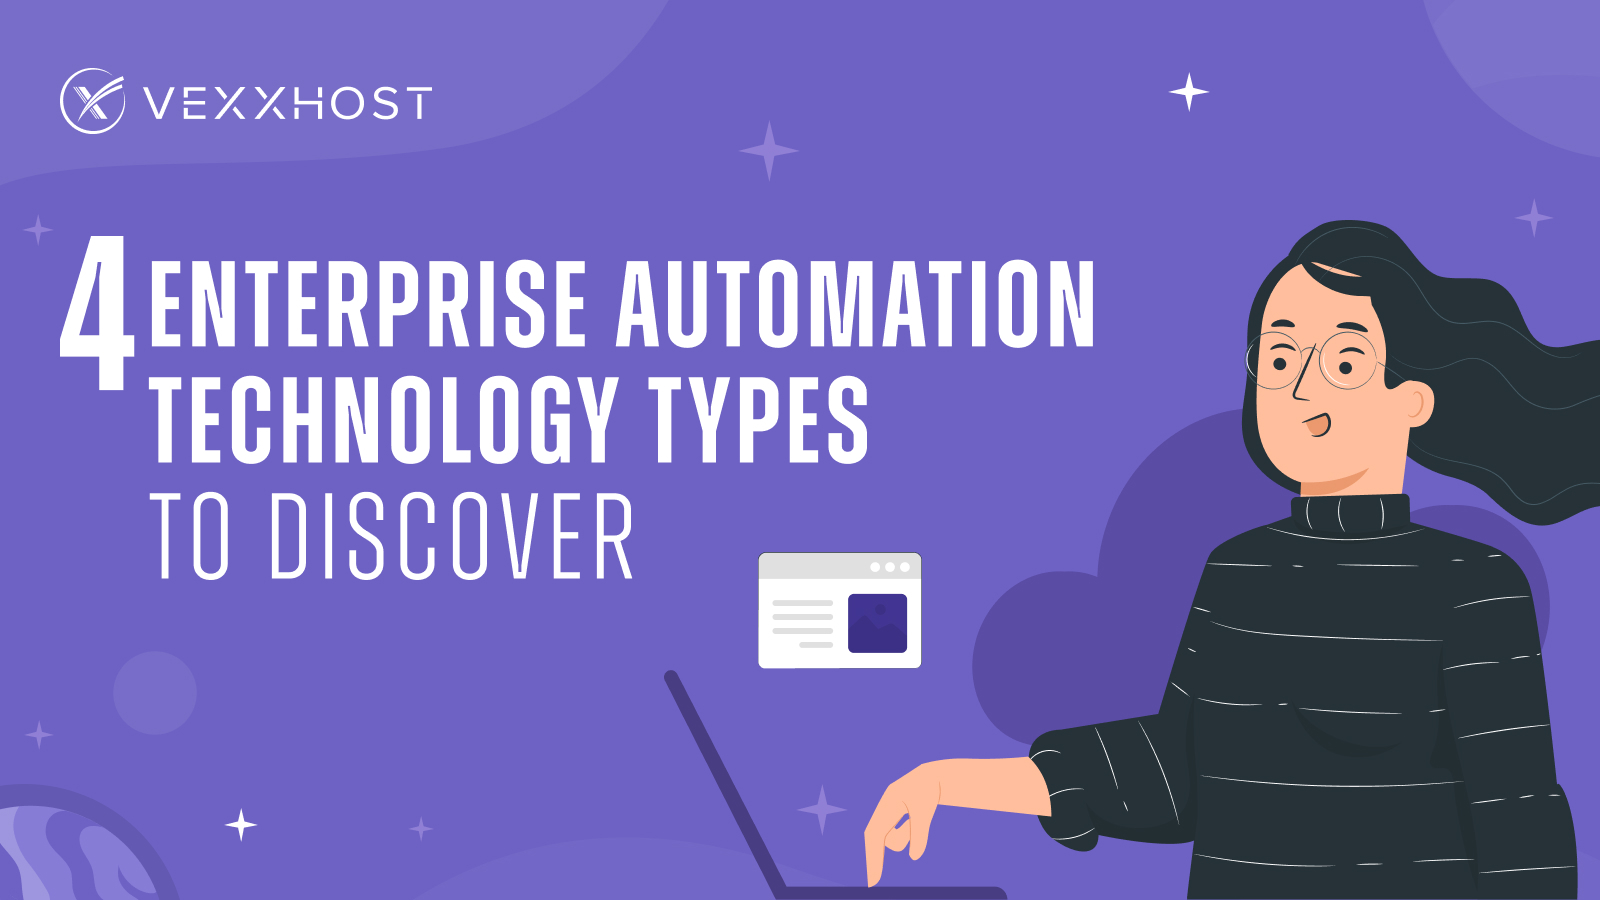 4 Enterprise Automation Technology Types to Discover